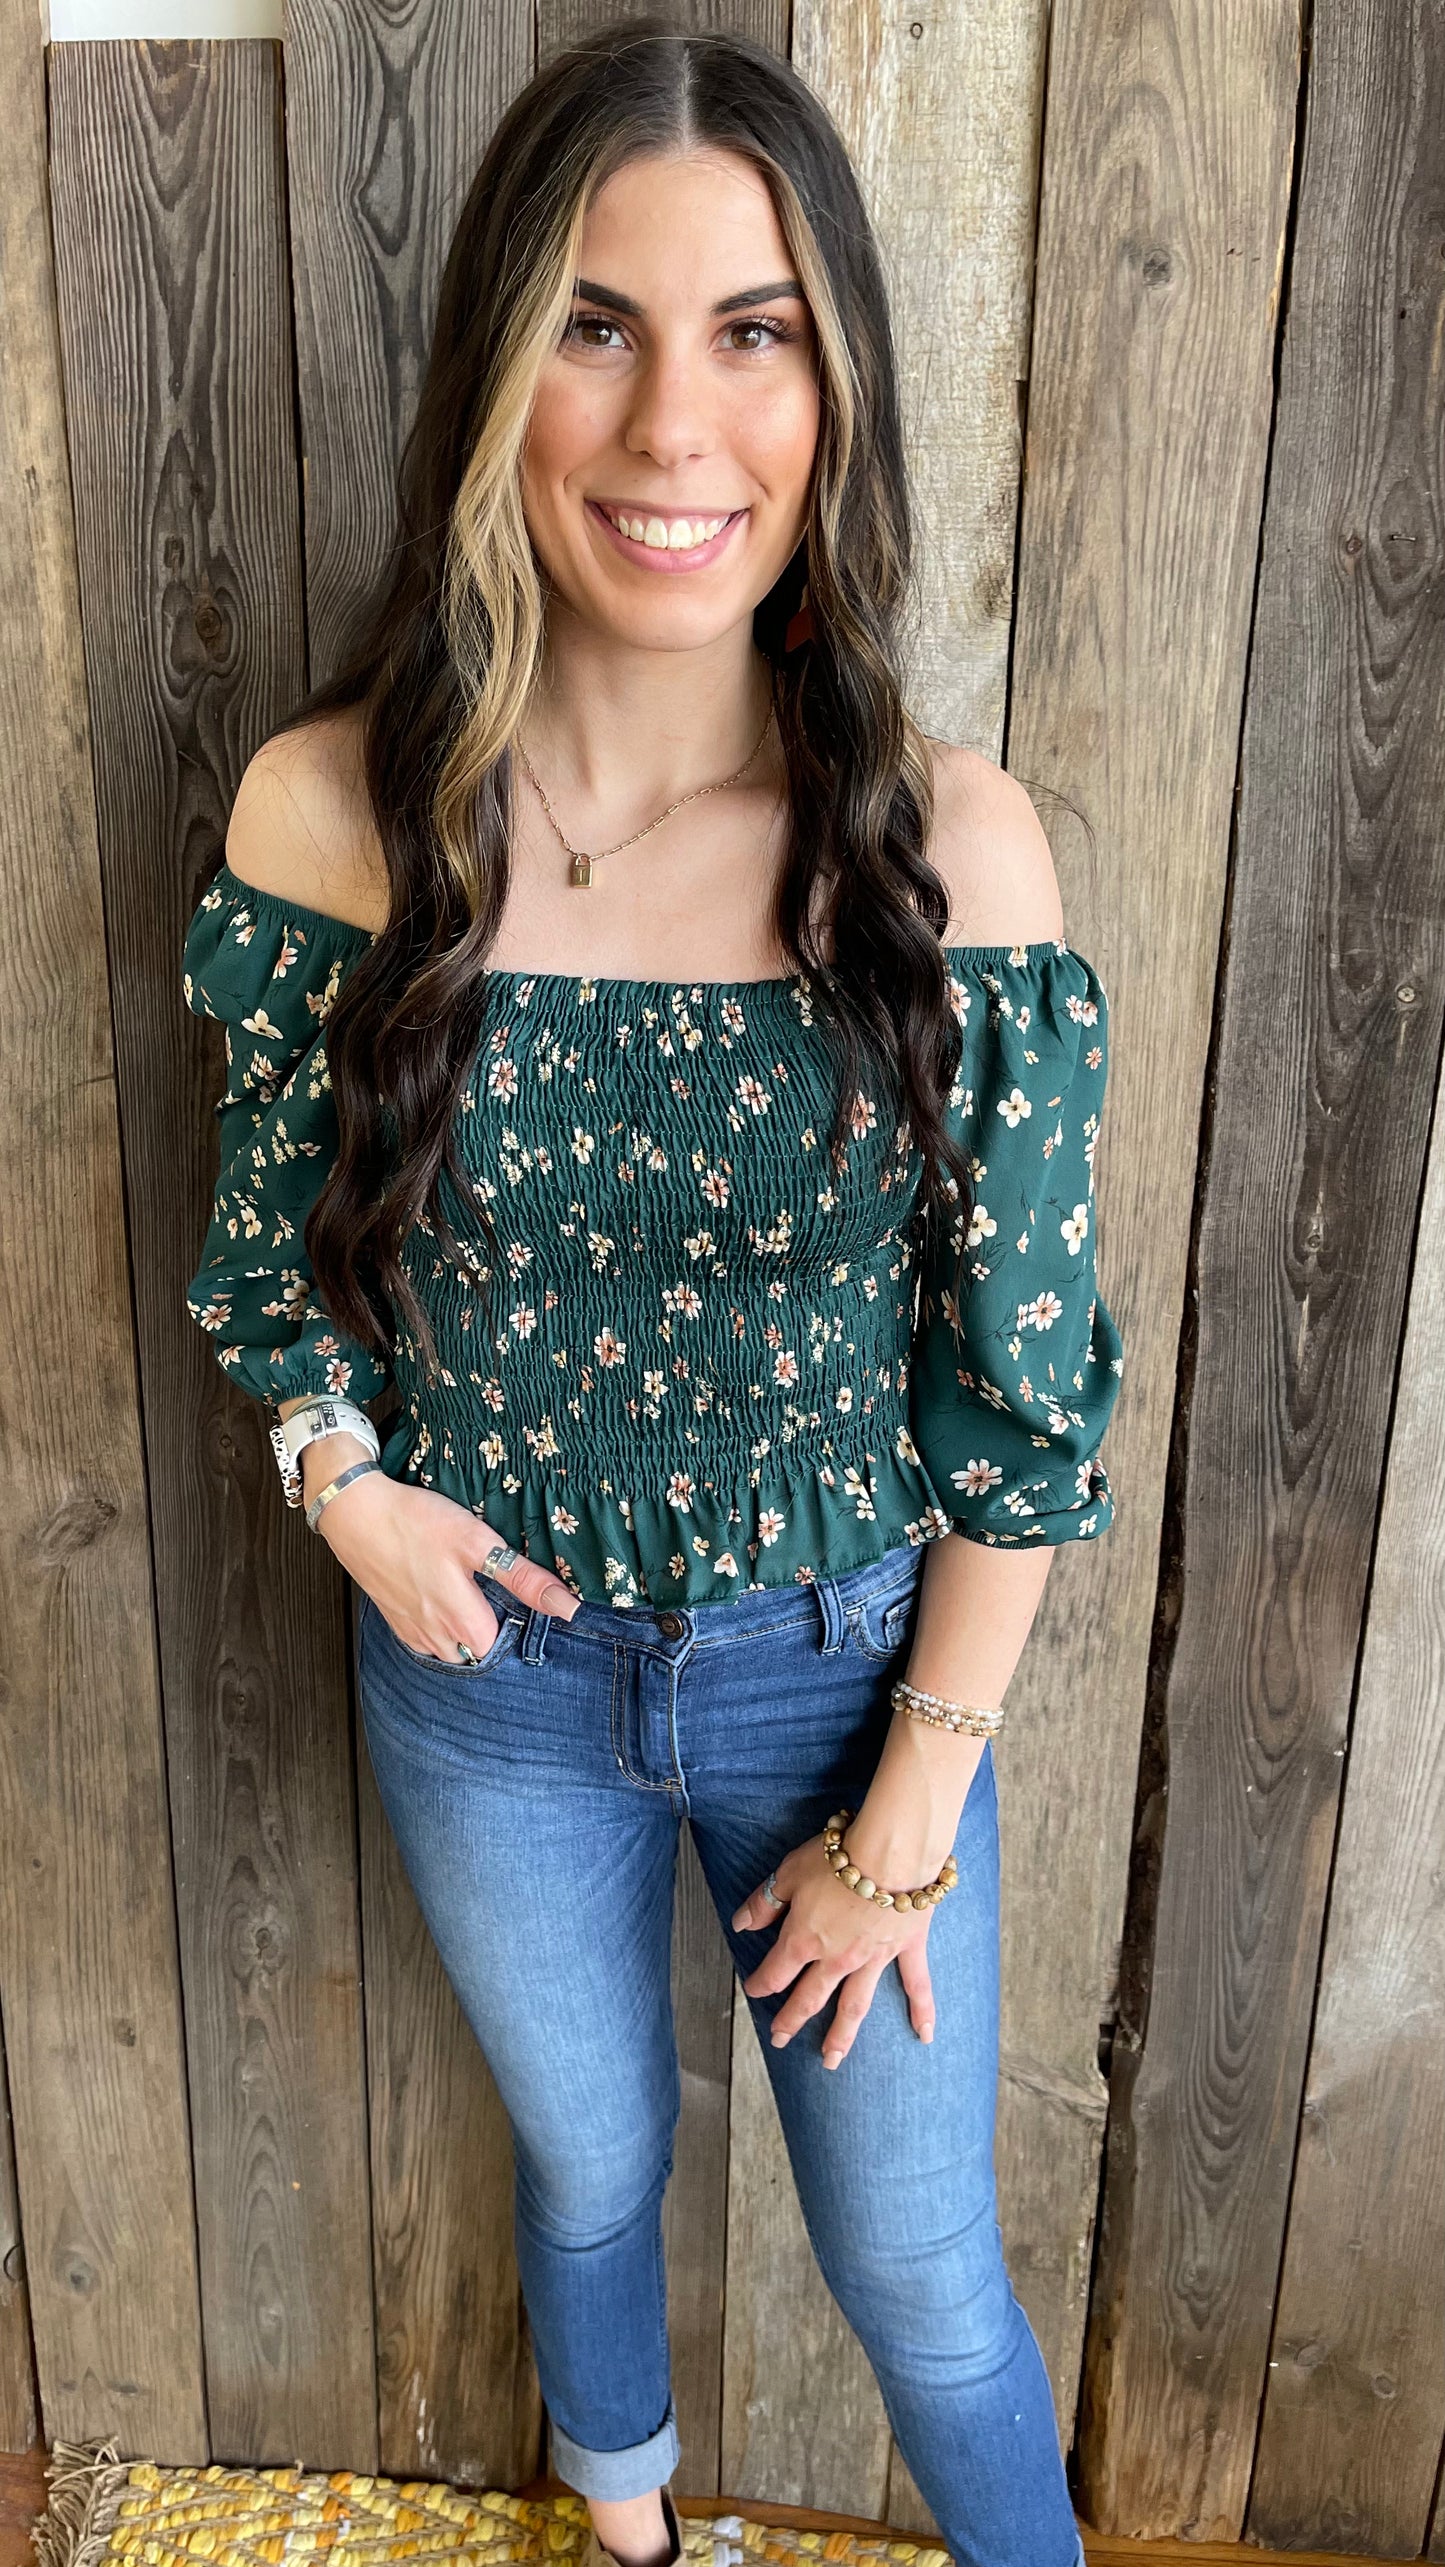 The Cianna Emerald Smocked Floral Print Top